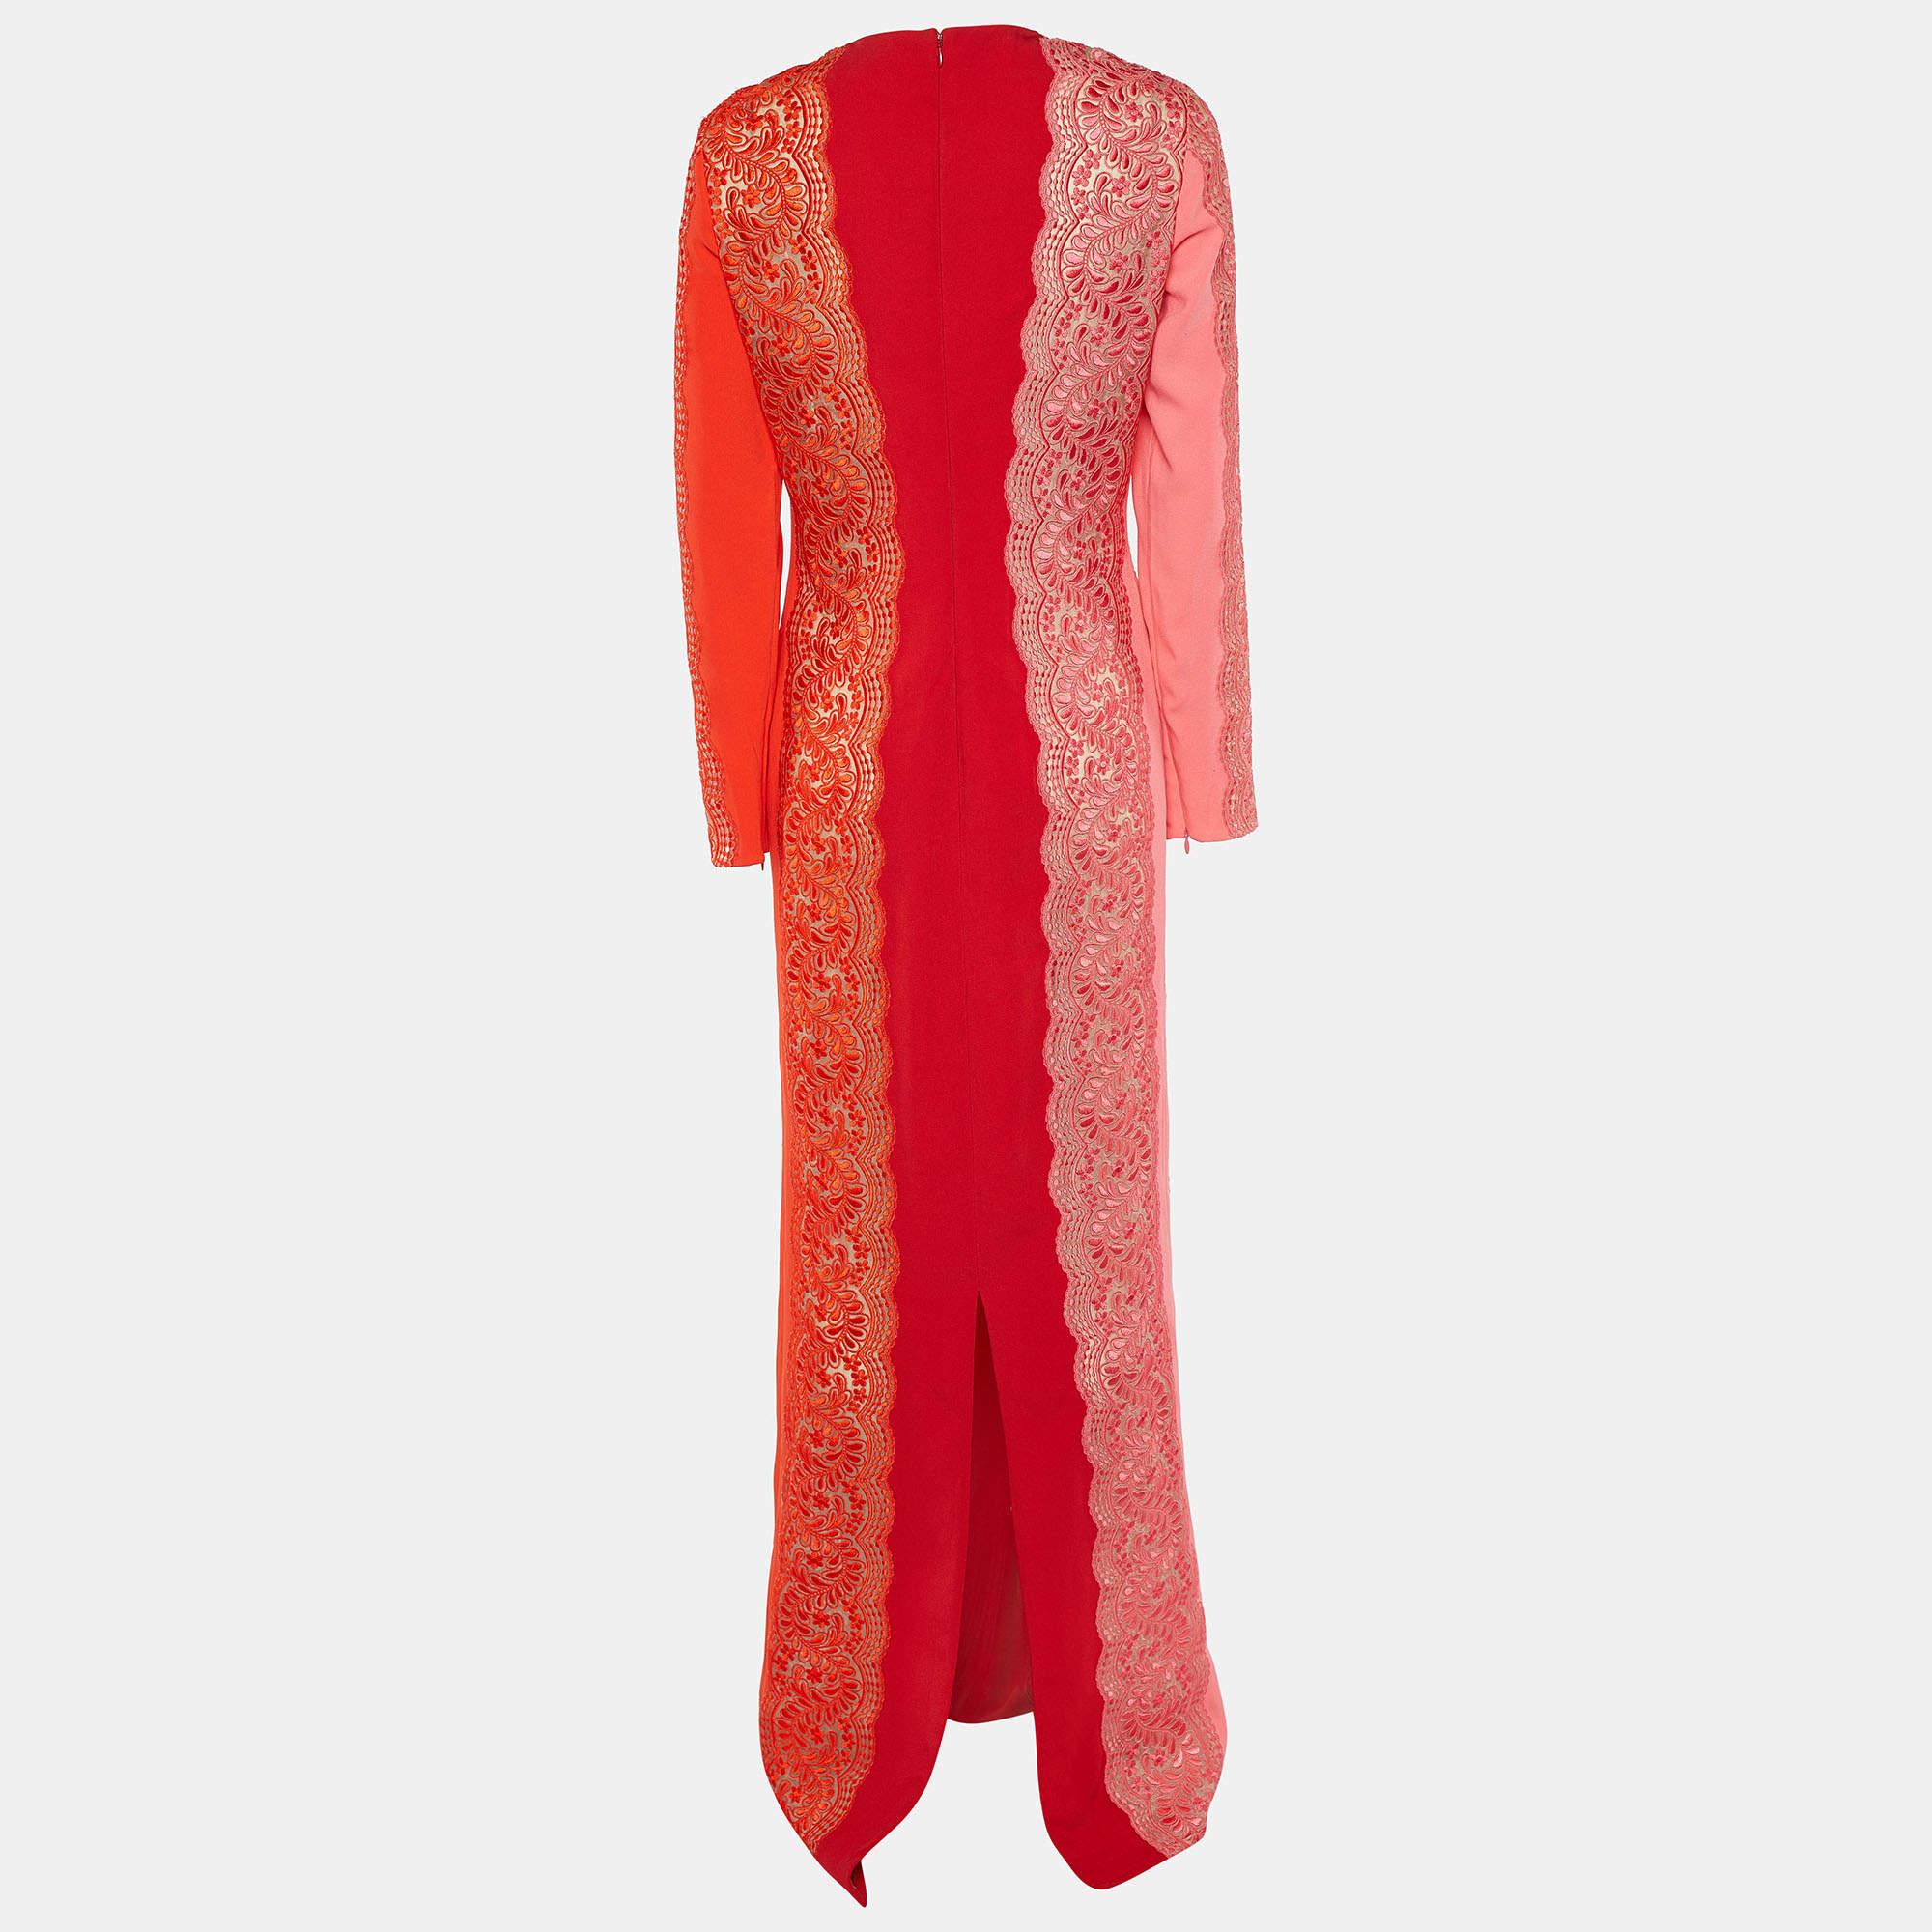 The fine artistry and the feminine silhouette of this designer dress exhibit the label's impeccable craftsmanship in tailoring. It is stitched using quality materials, has a good fit, and can be easily styled with chic accessories, open-toe sandals,